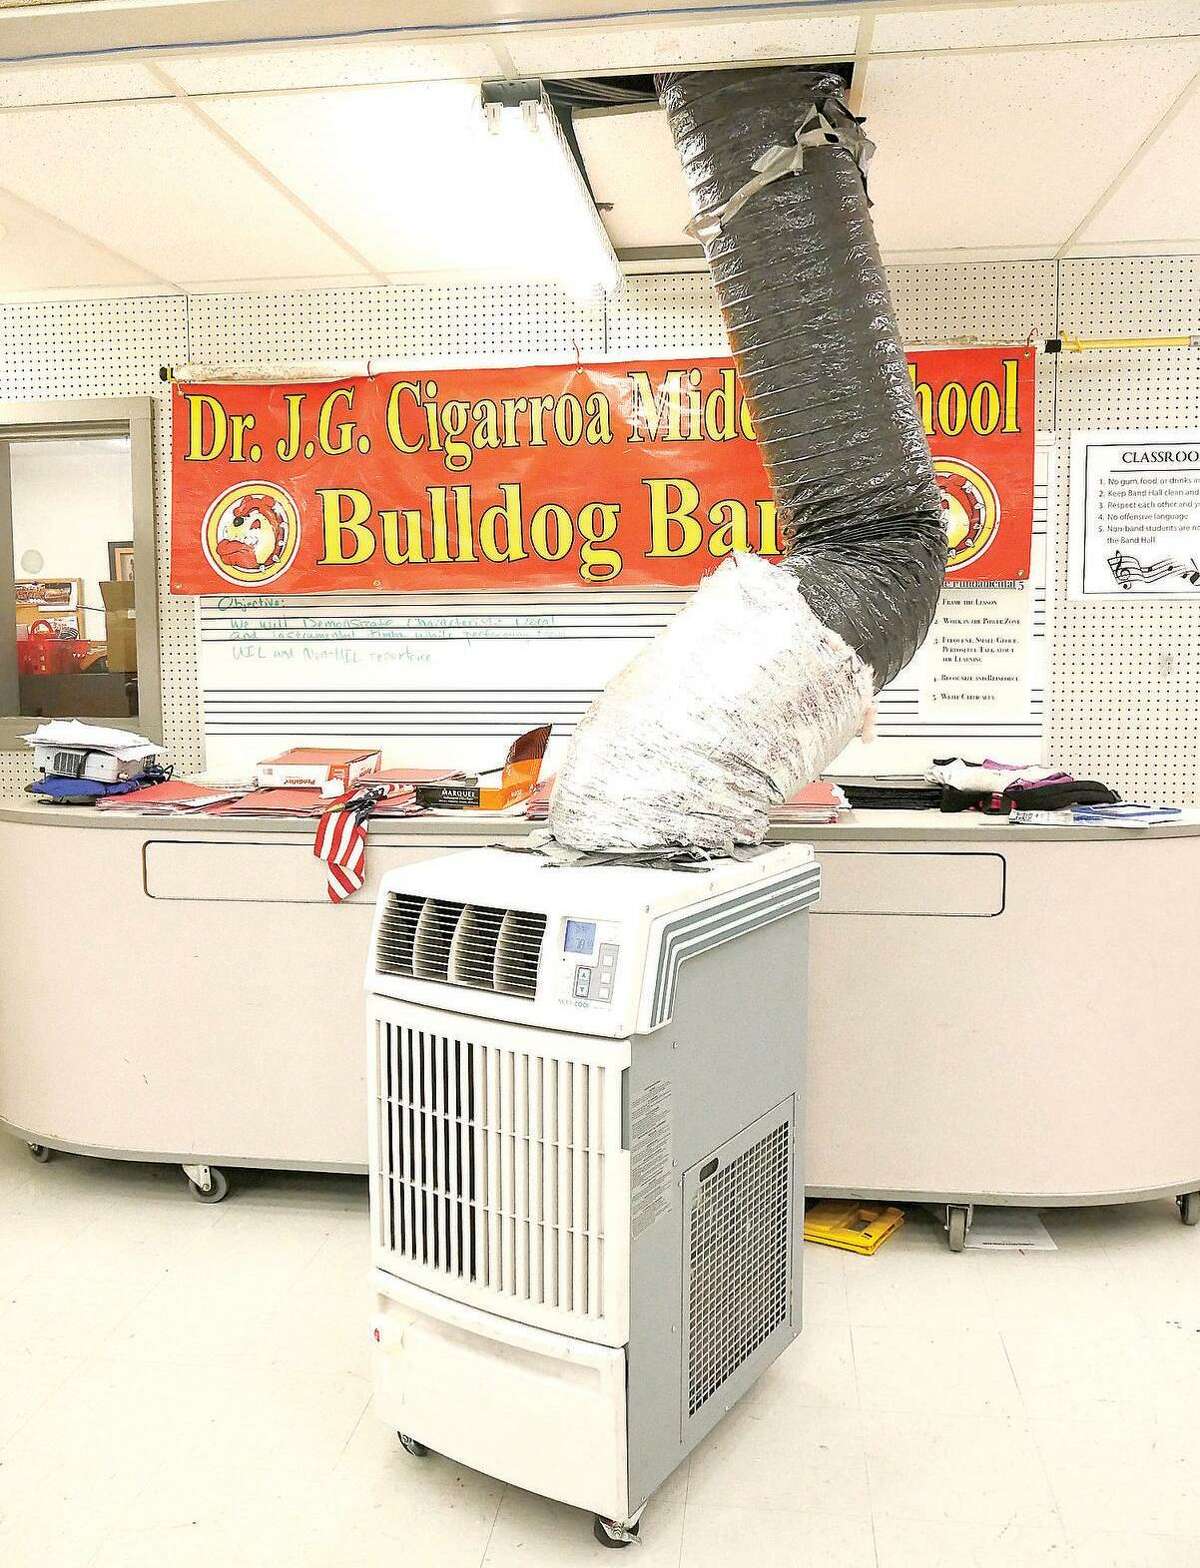 Portable air conditioning units are set up in the band and choir rooms because of the lack of central air conditioning in that wing of Cigarroa Middle School.